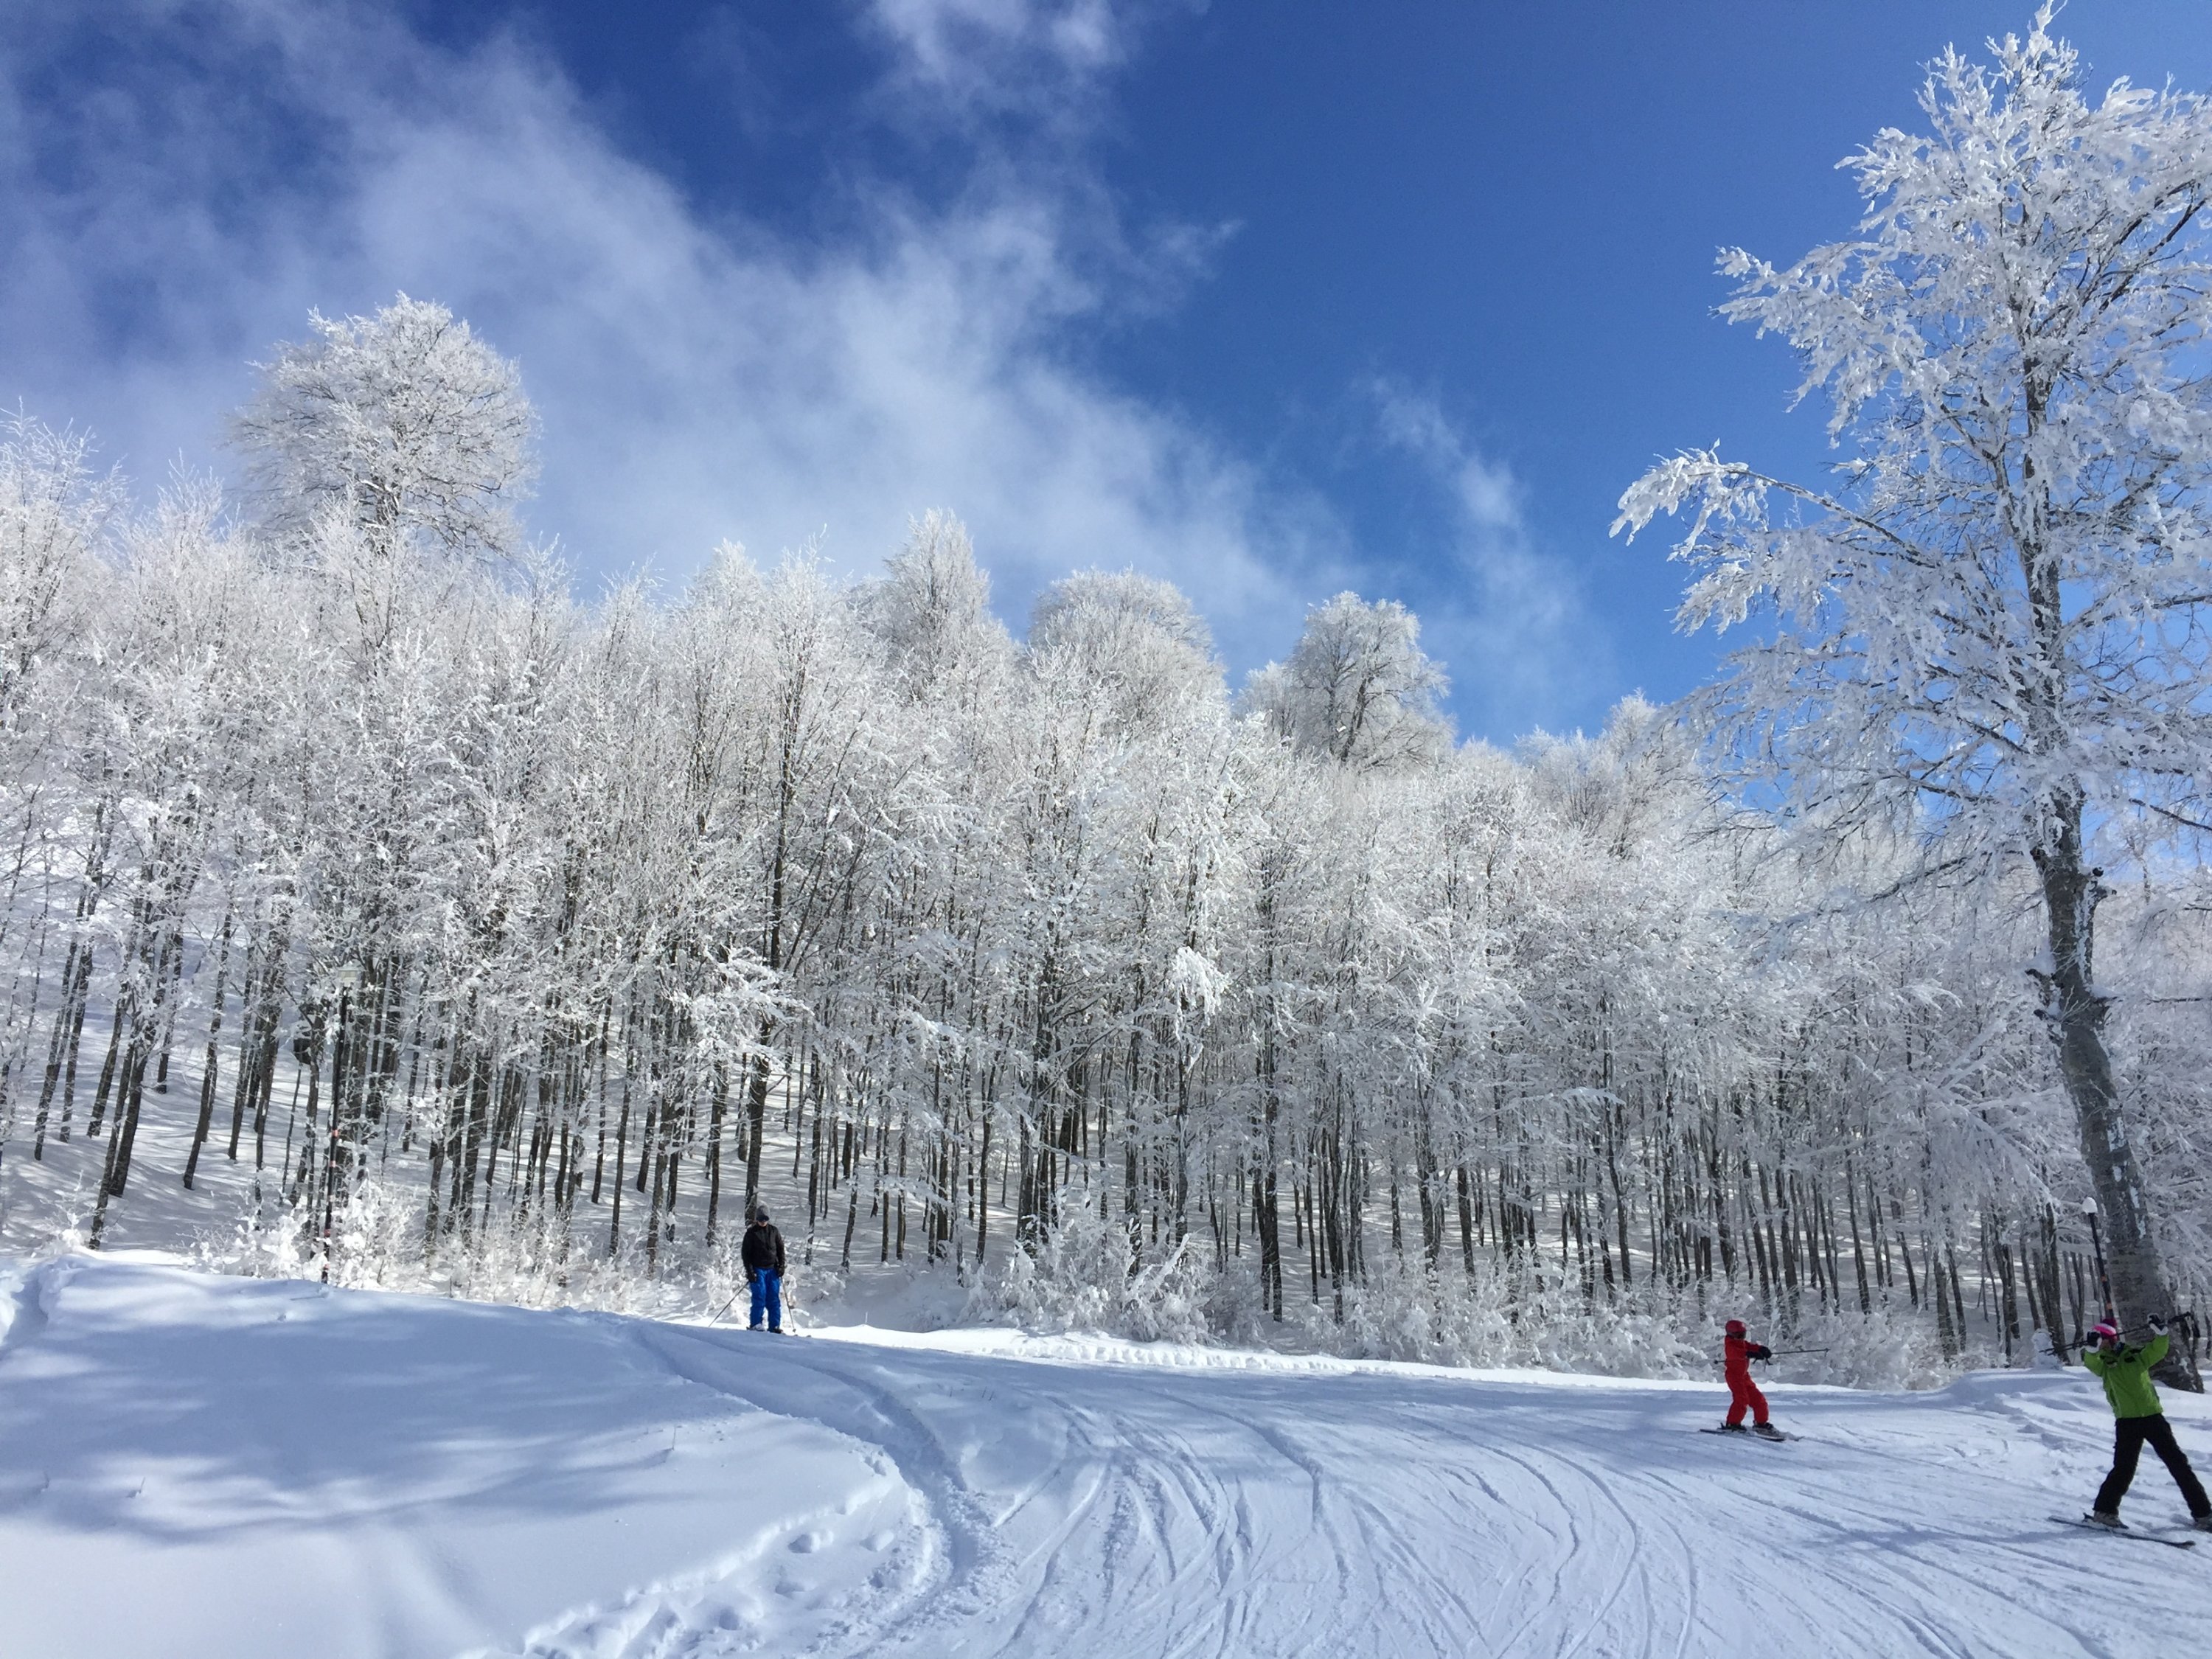 The snow-blanketed trees and blue skies at Kartepe make for great Instagram photo-ops. (Shutterstock Photo)